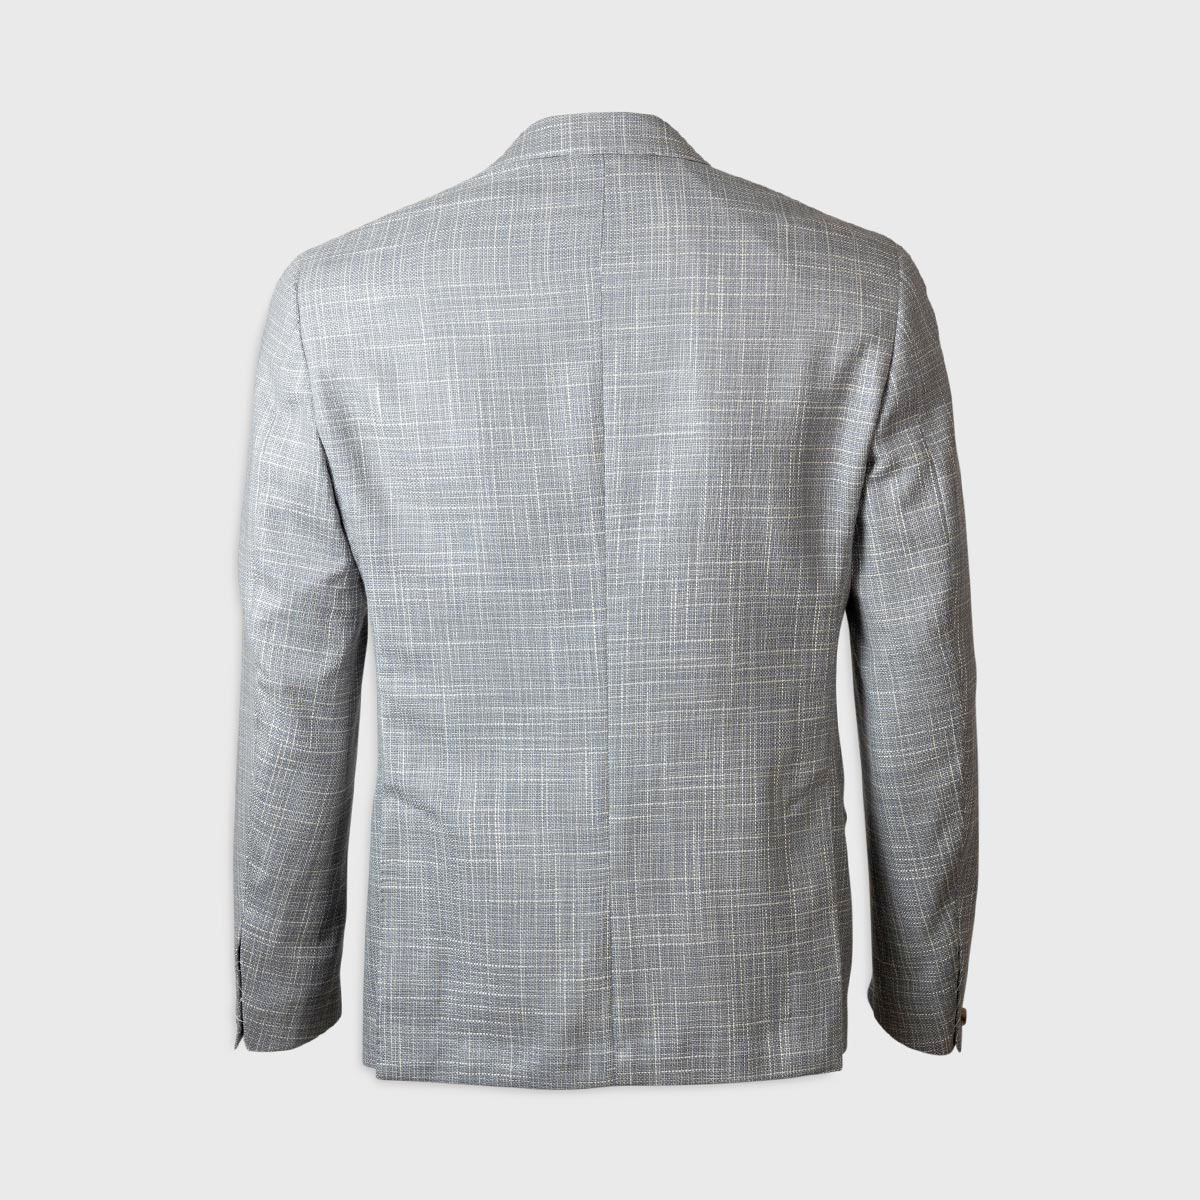 Single-breasted unlined jacket in 130’S Wool – Grey Melillo 1970 on sale 2022 2